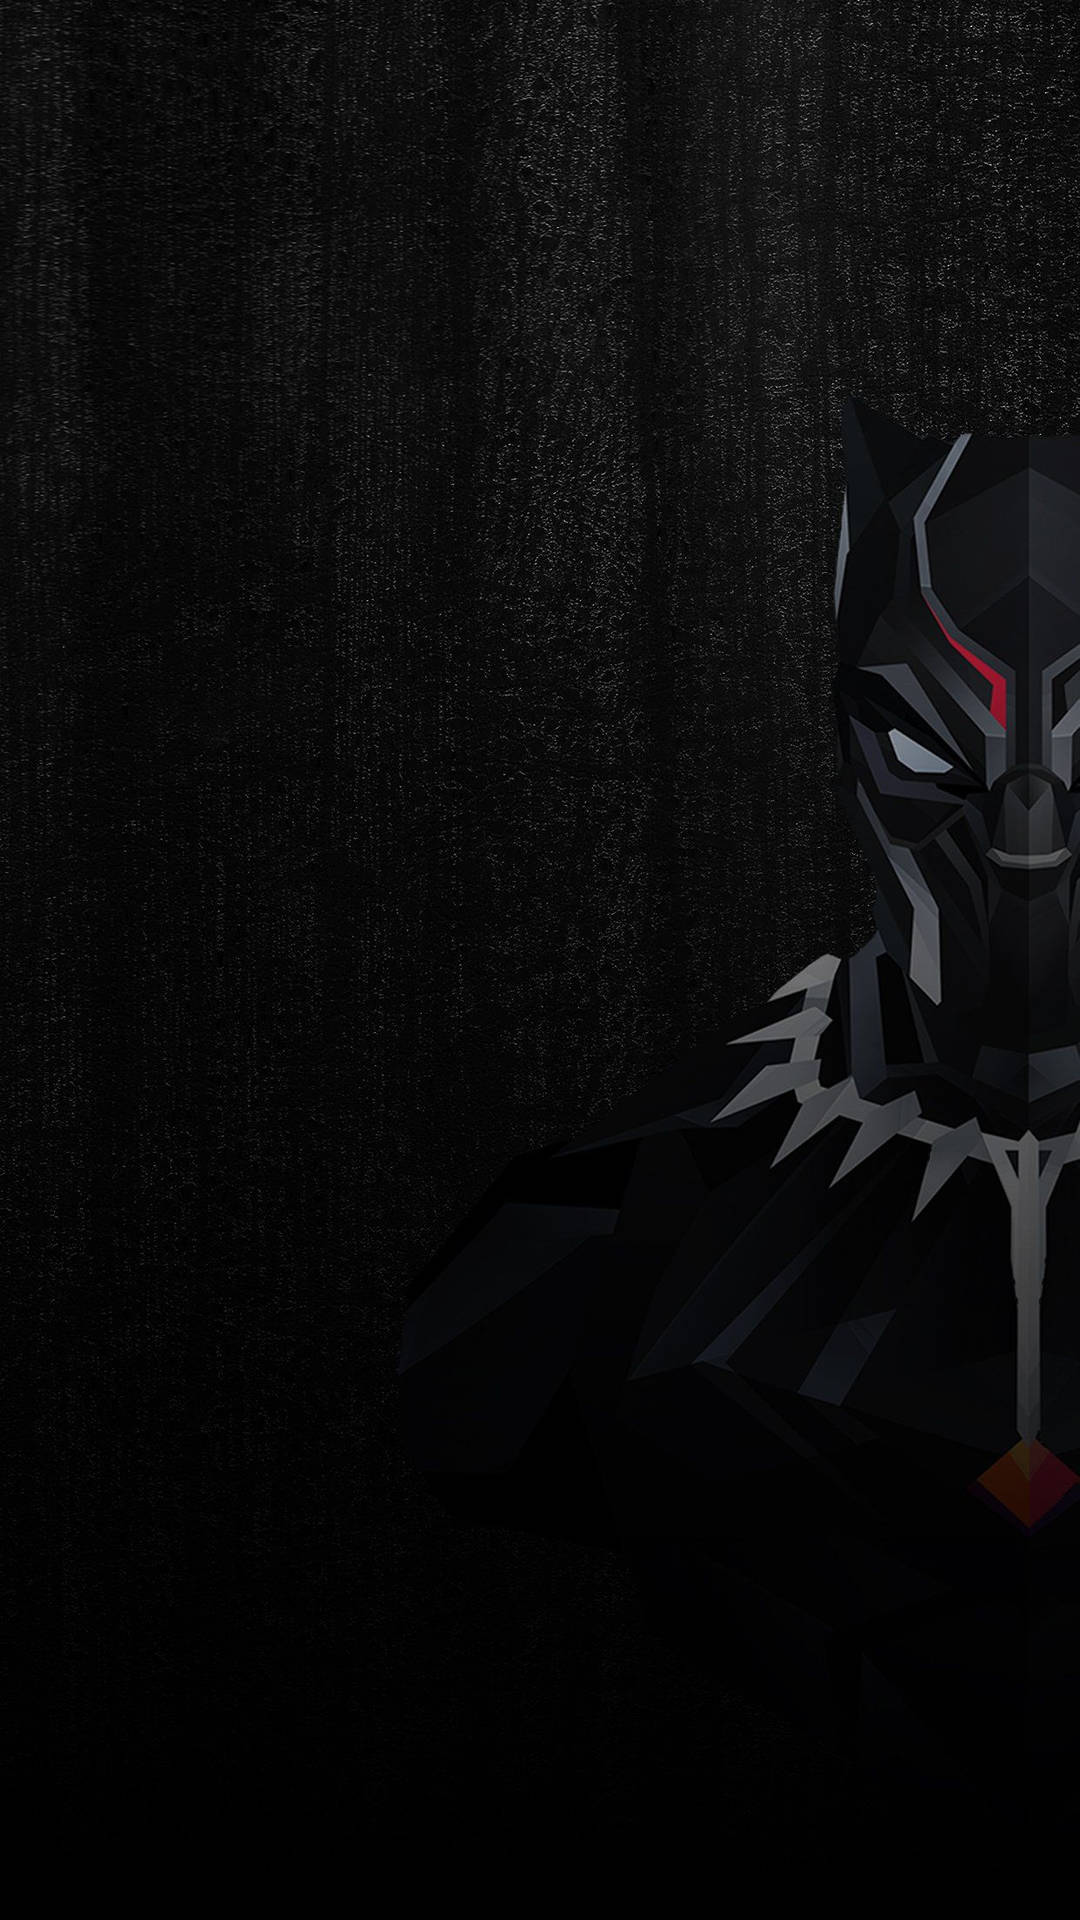 An Illustration of the Protector of Wakanda--Black Panther Wallpaper